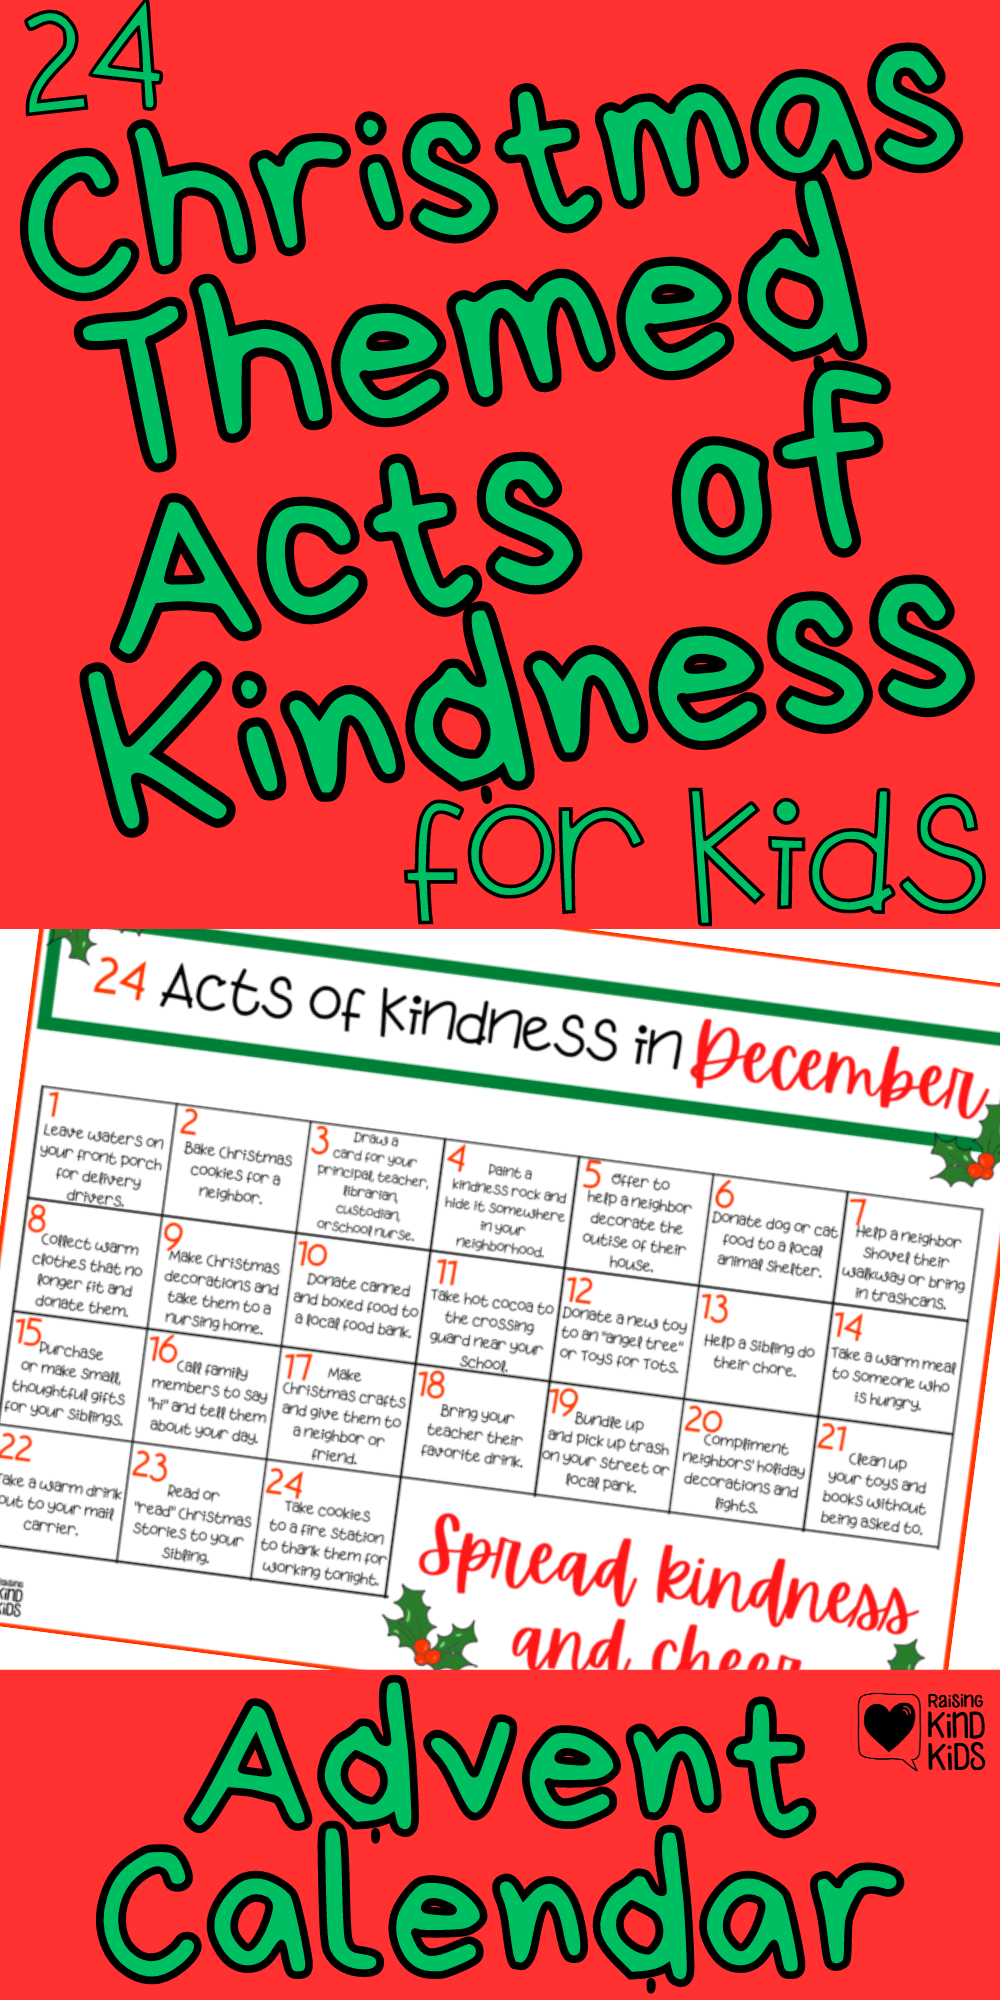 Use this Christmas Kindness for Kids Advent Calendar free printable to get 24 kindness activities perfect for December.Use this Christmas Kindness for Kids Advent Calendar free printable to get 24 kindness activities perfect for December.Use this Christmas Kindness for Kids Advent Calendar free printable to get 24 kindness activities perfect for December.